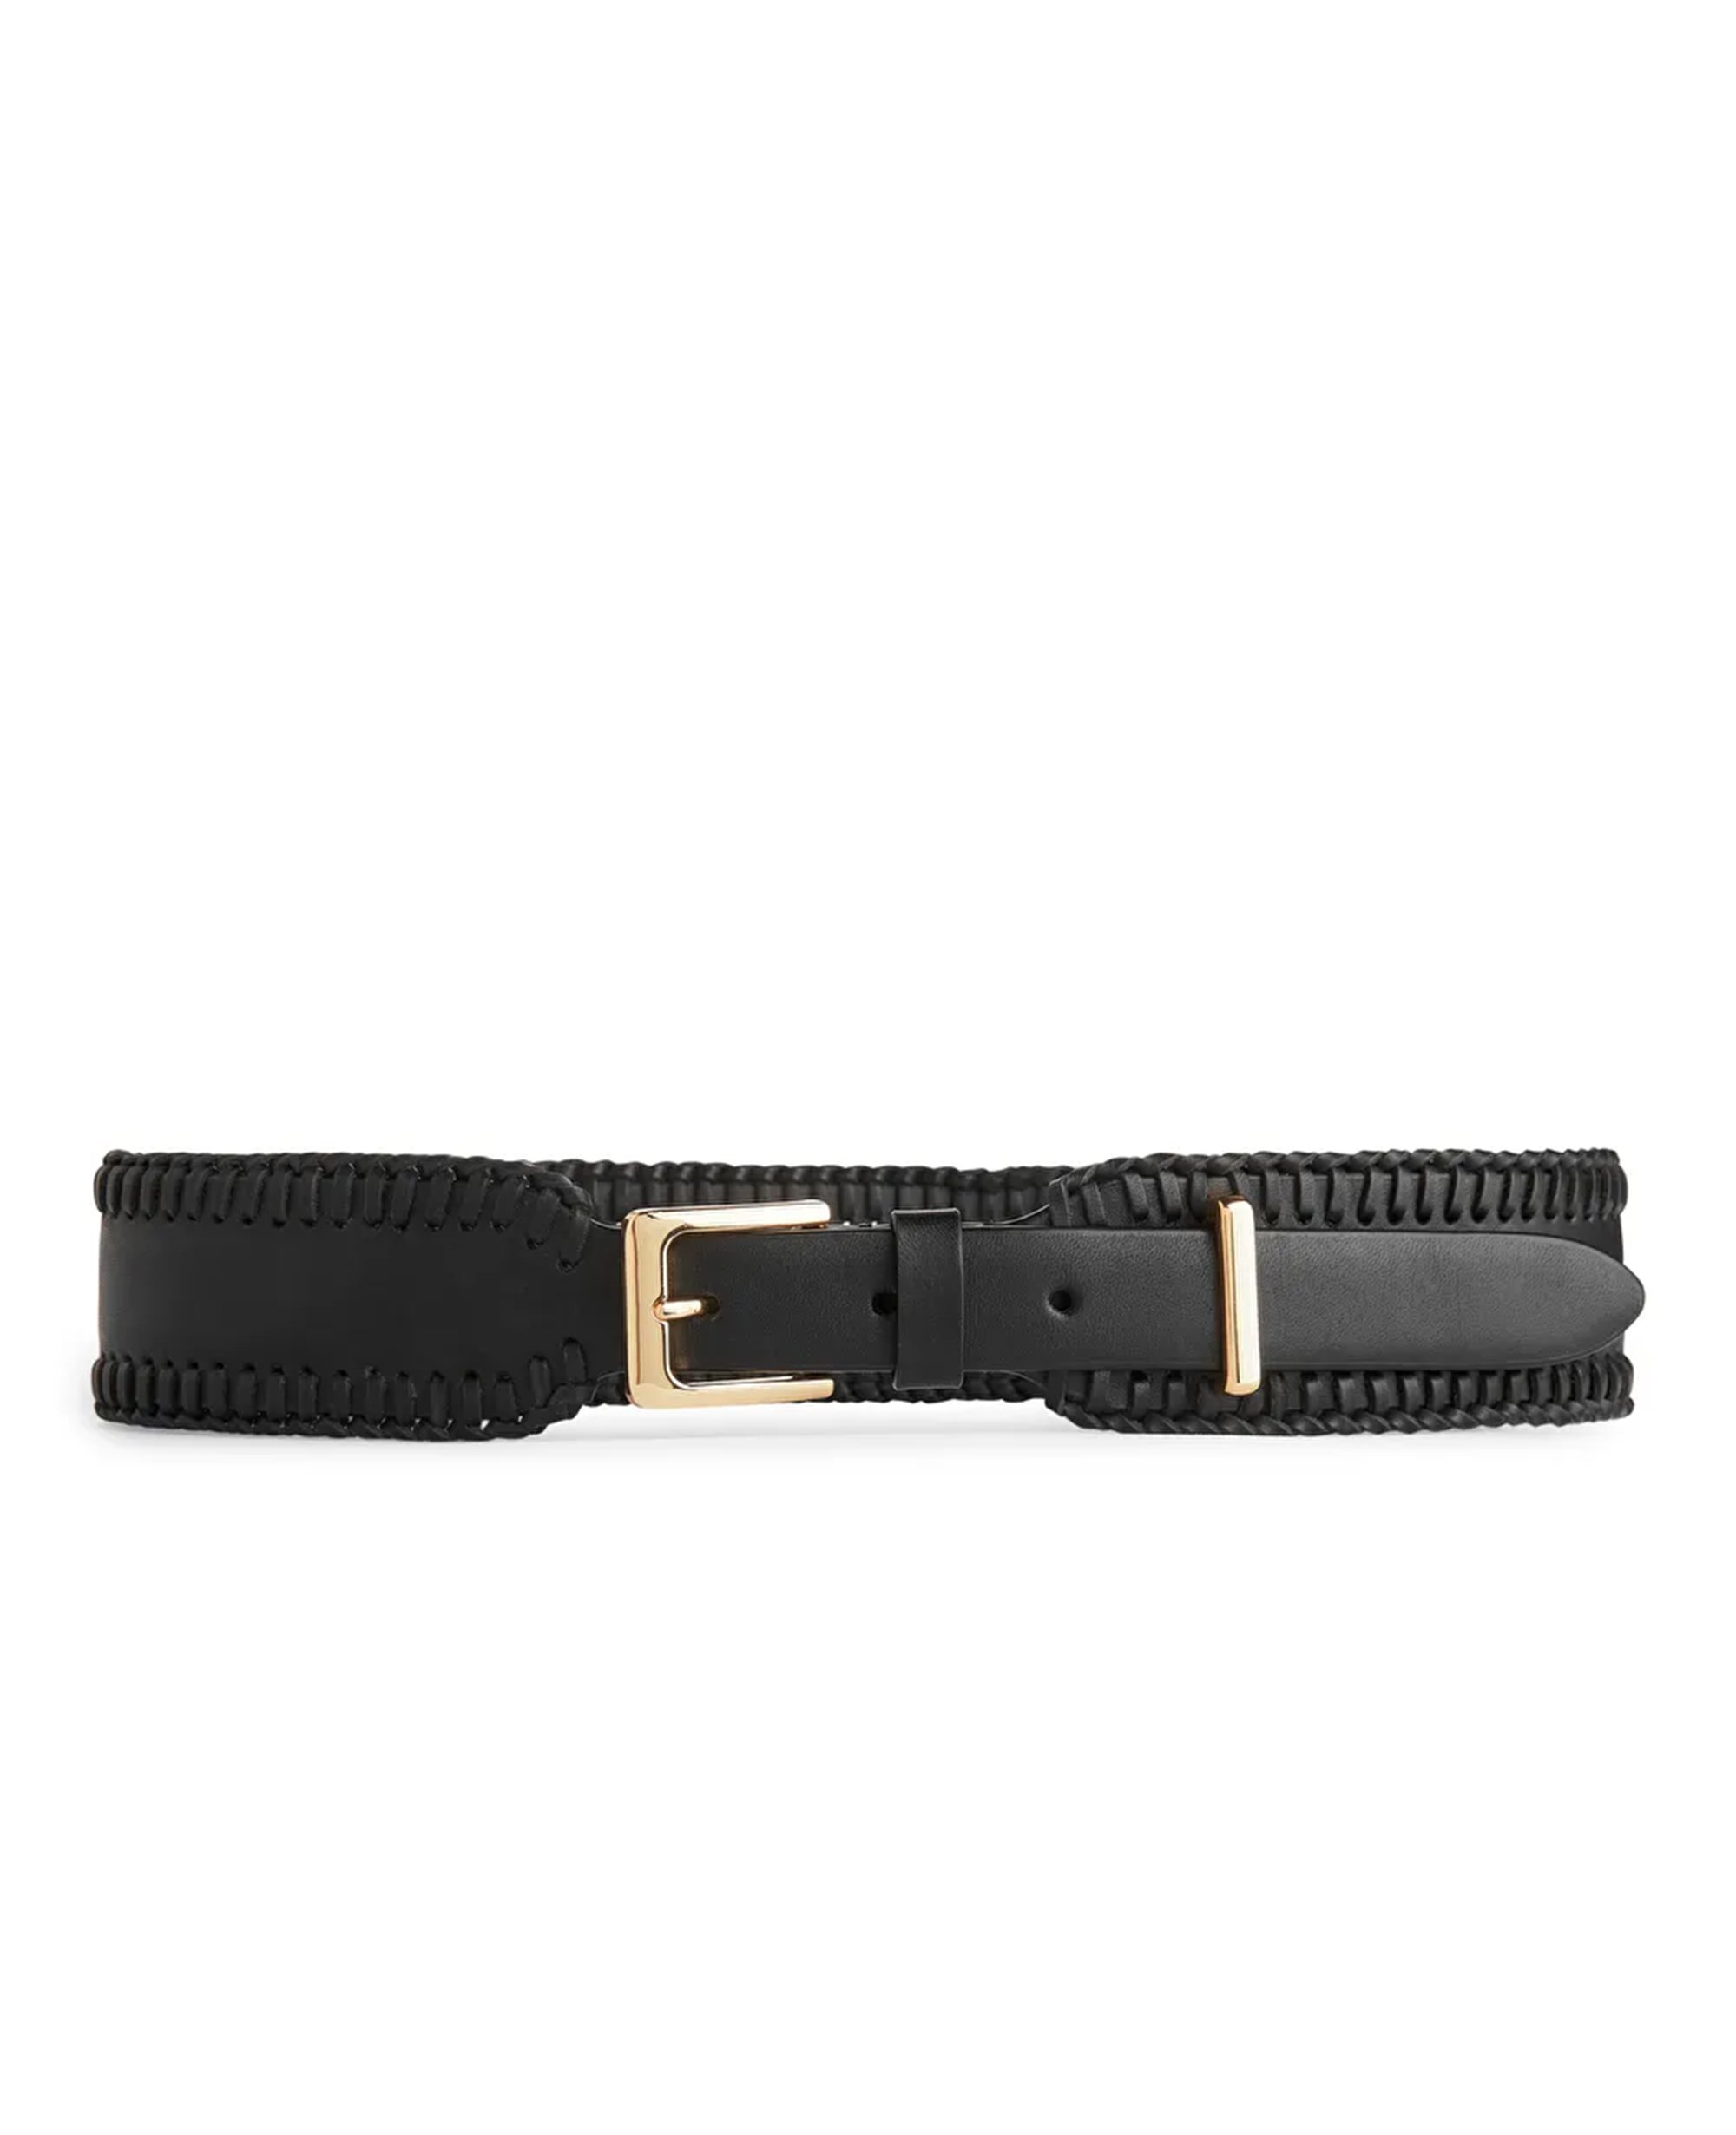 Dropship Fashion Belts Female Famous Brand Designer Belts Women Embossed  Popular PU Alloy Buckle Woman Belt to Sell Online at a Lower Price